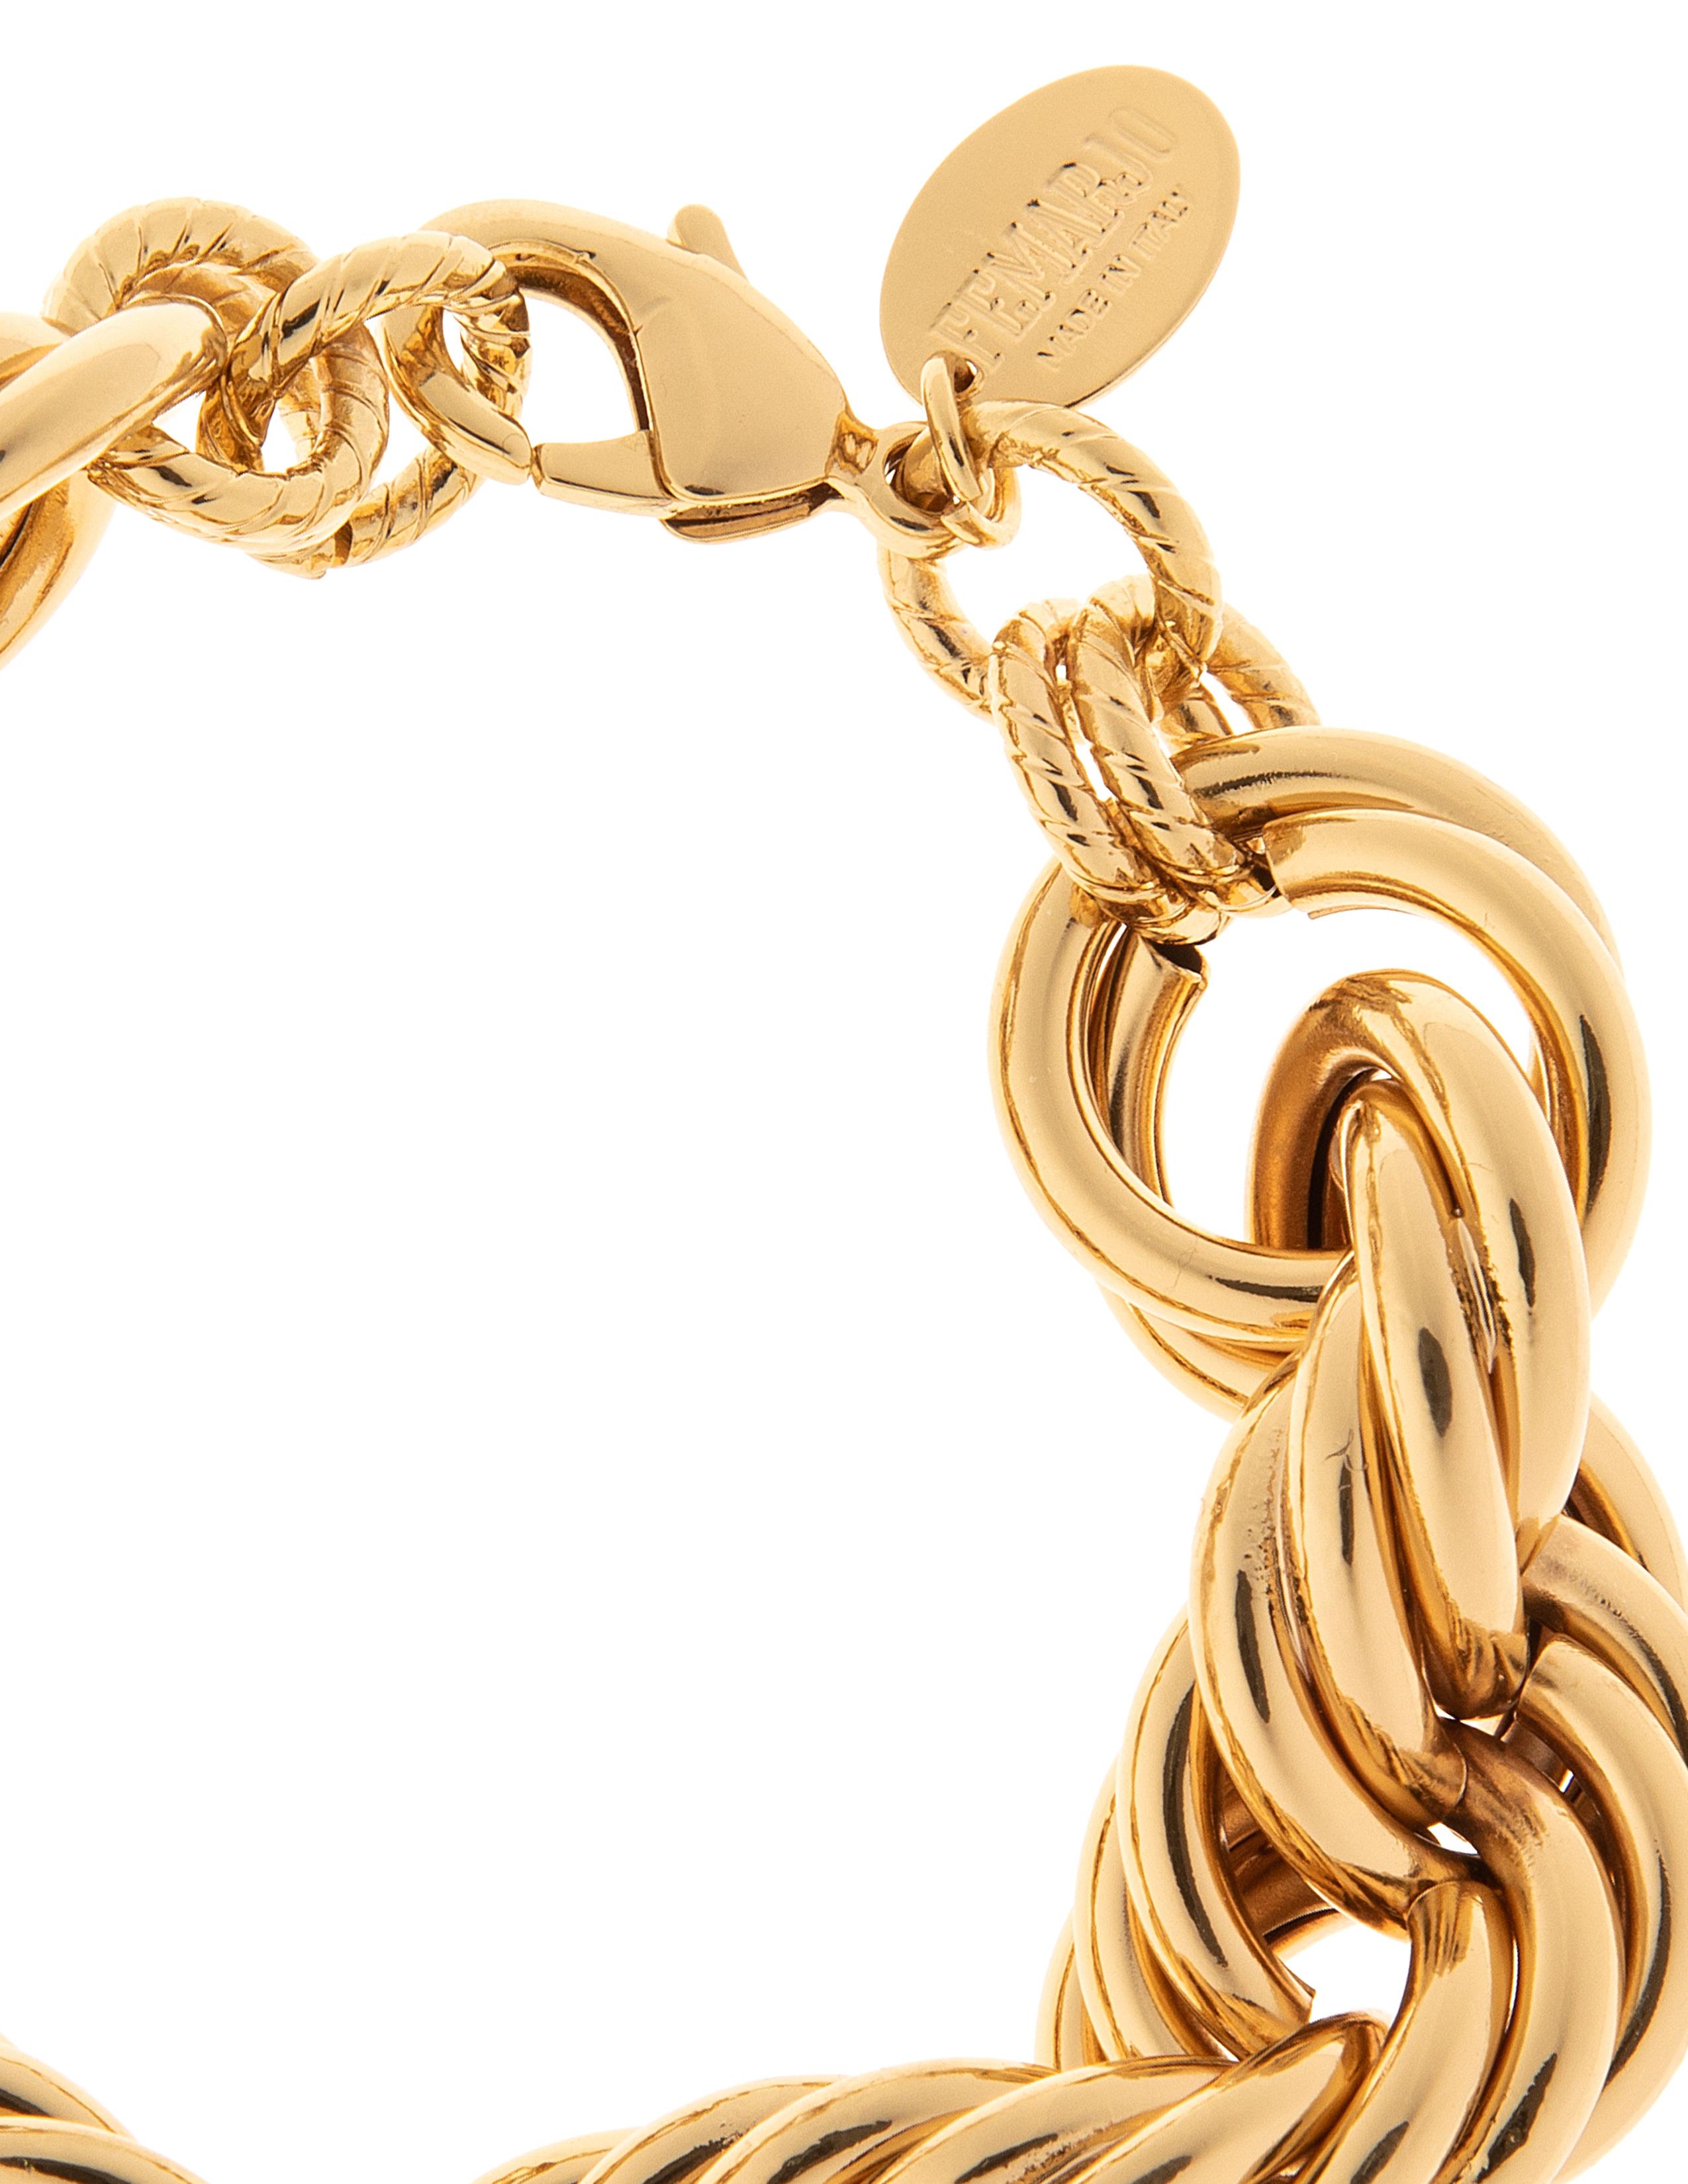 Brass maxi torchon chain bracelet handmade in Italy
24KT gold plated
Adjustable
Nickel free